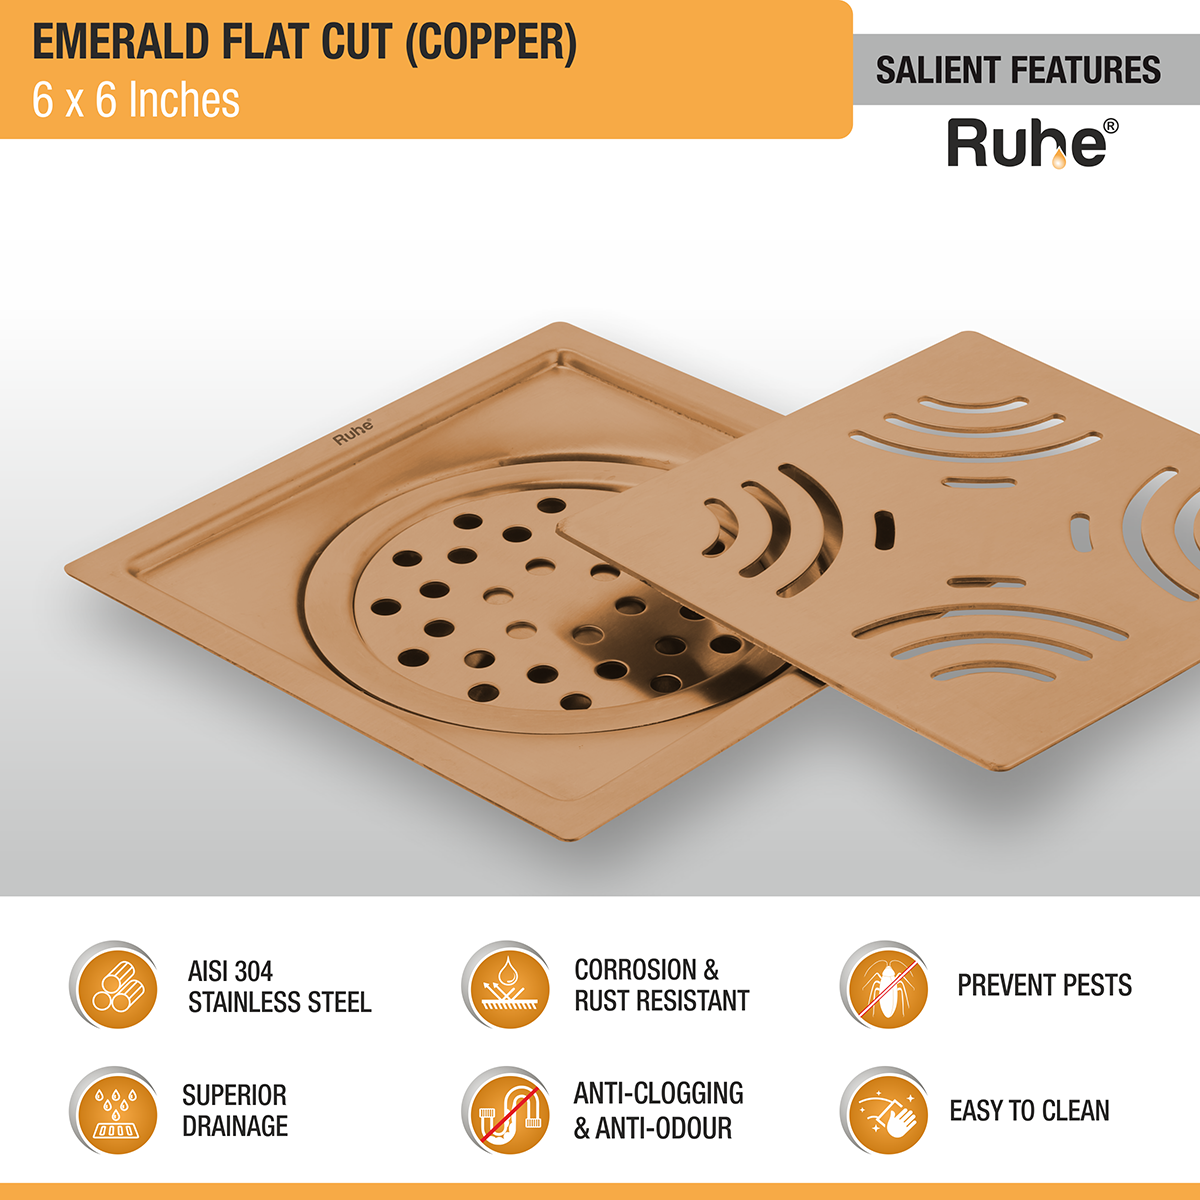 Emerald Square Flat Cut Floor Drain in Antique Copper PVD Coating (6 x 6 Inches) features